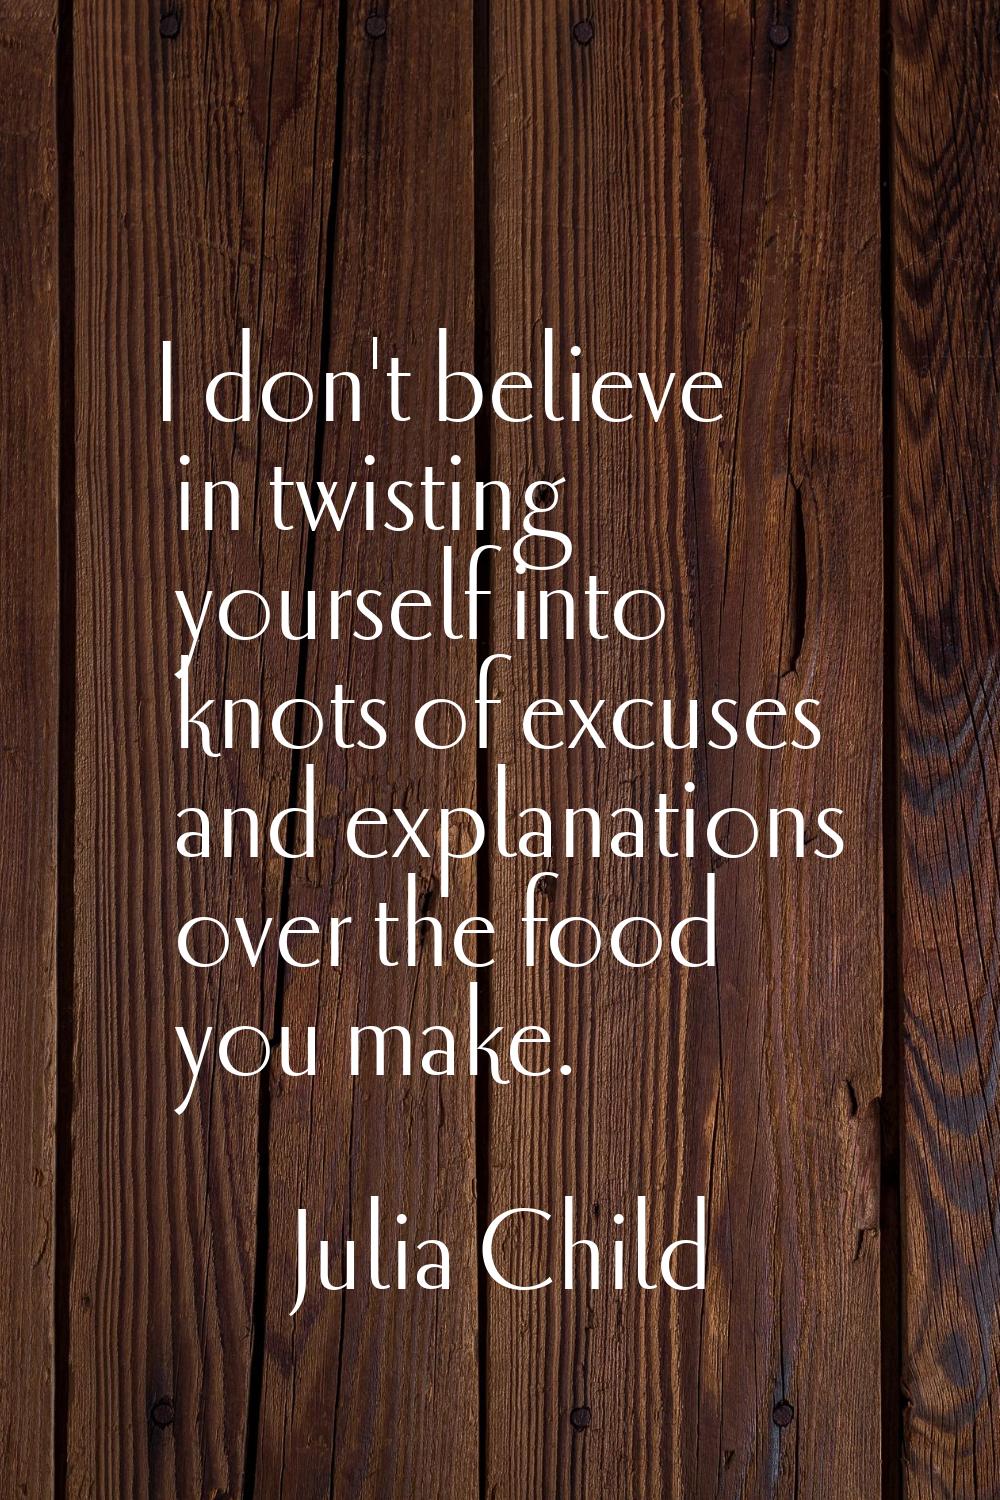 I don't believe in twisting yourself into knots of excuses and explanations over the food you make.